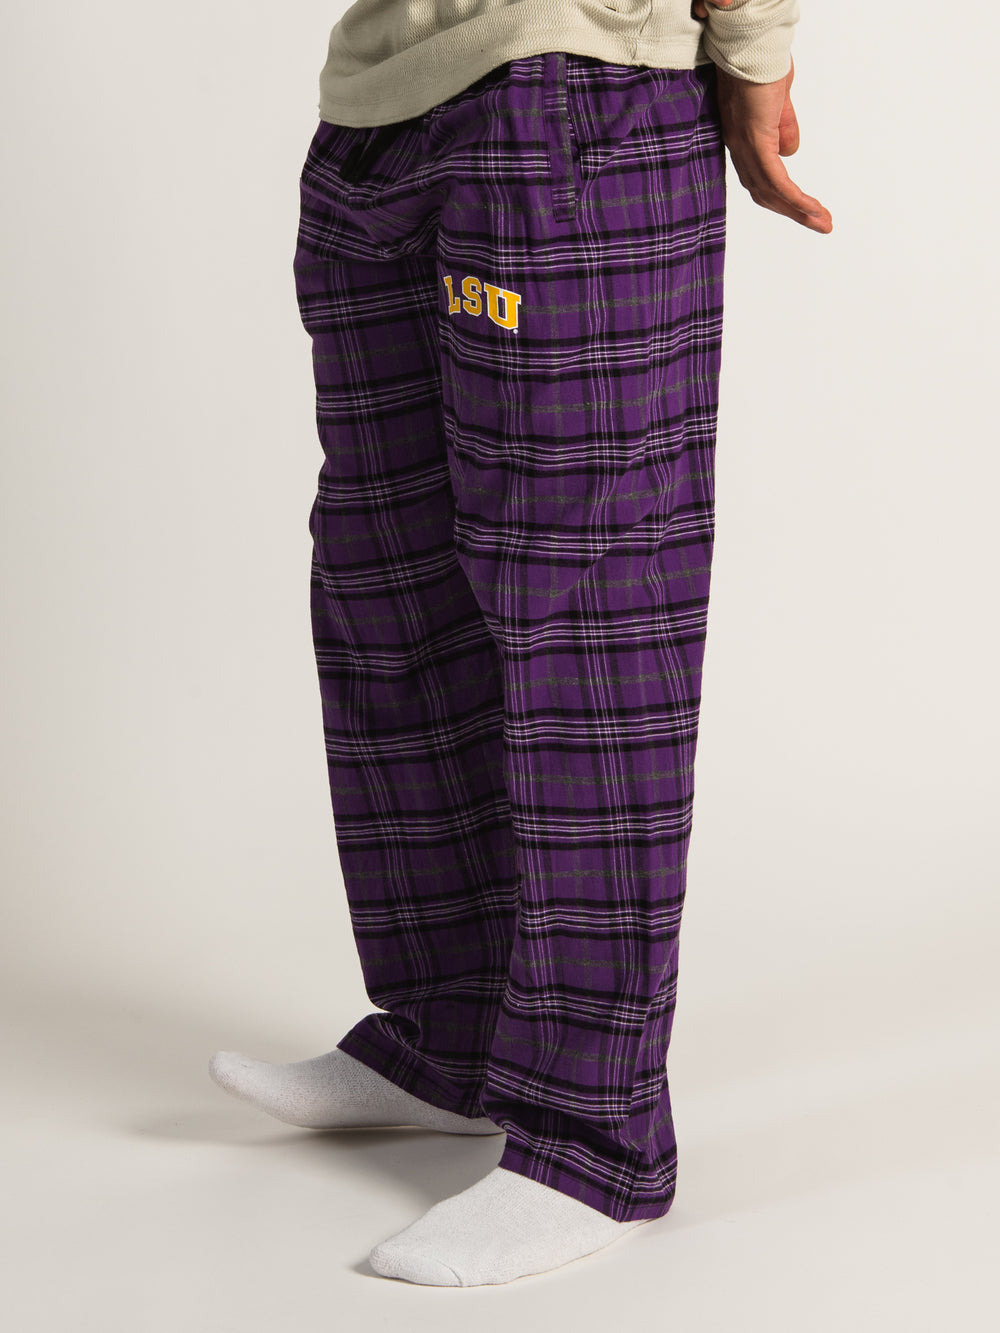 LSU FLANNEL PANT  - CLEARANCE